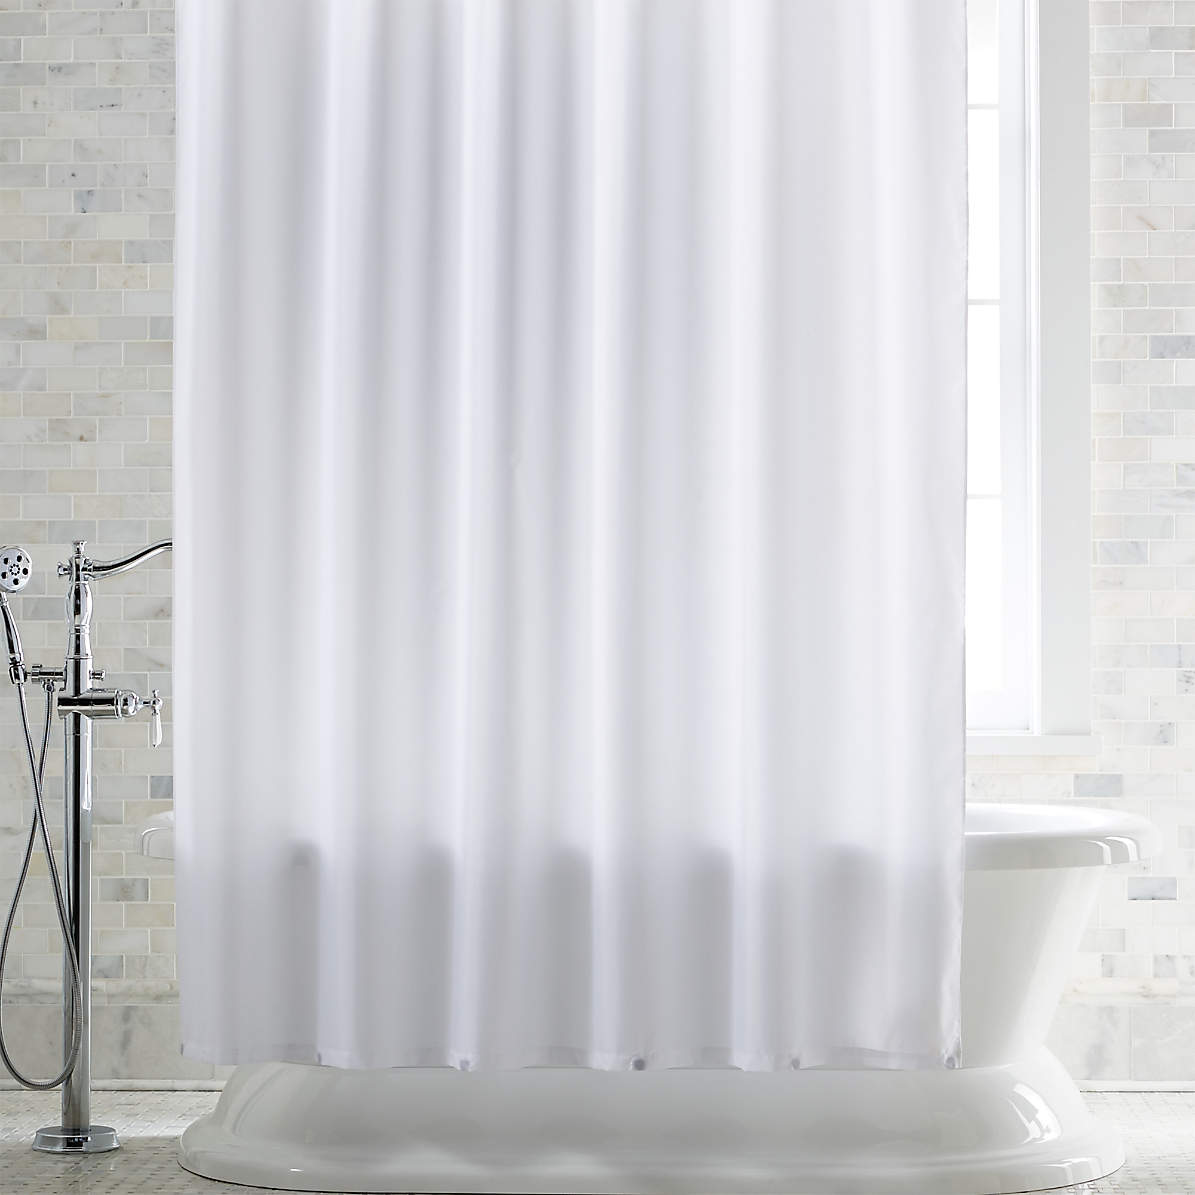 White Shower Curtain Liner With Magnets, Can I Use A Fabric Shower Curtain Without Liner